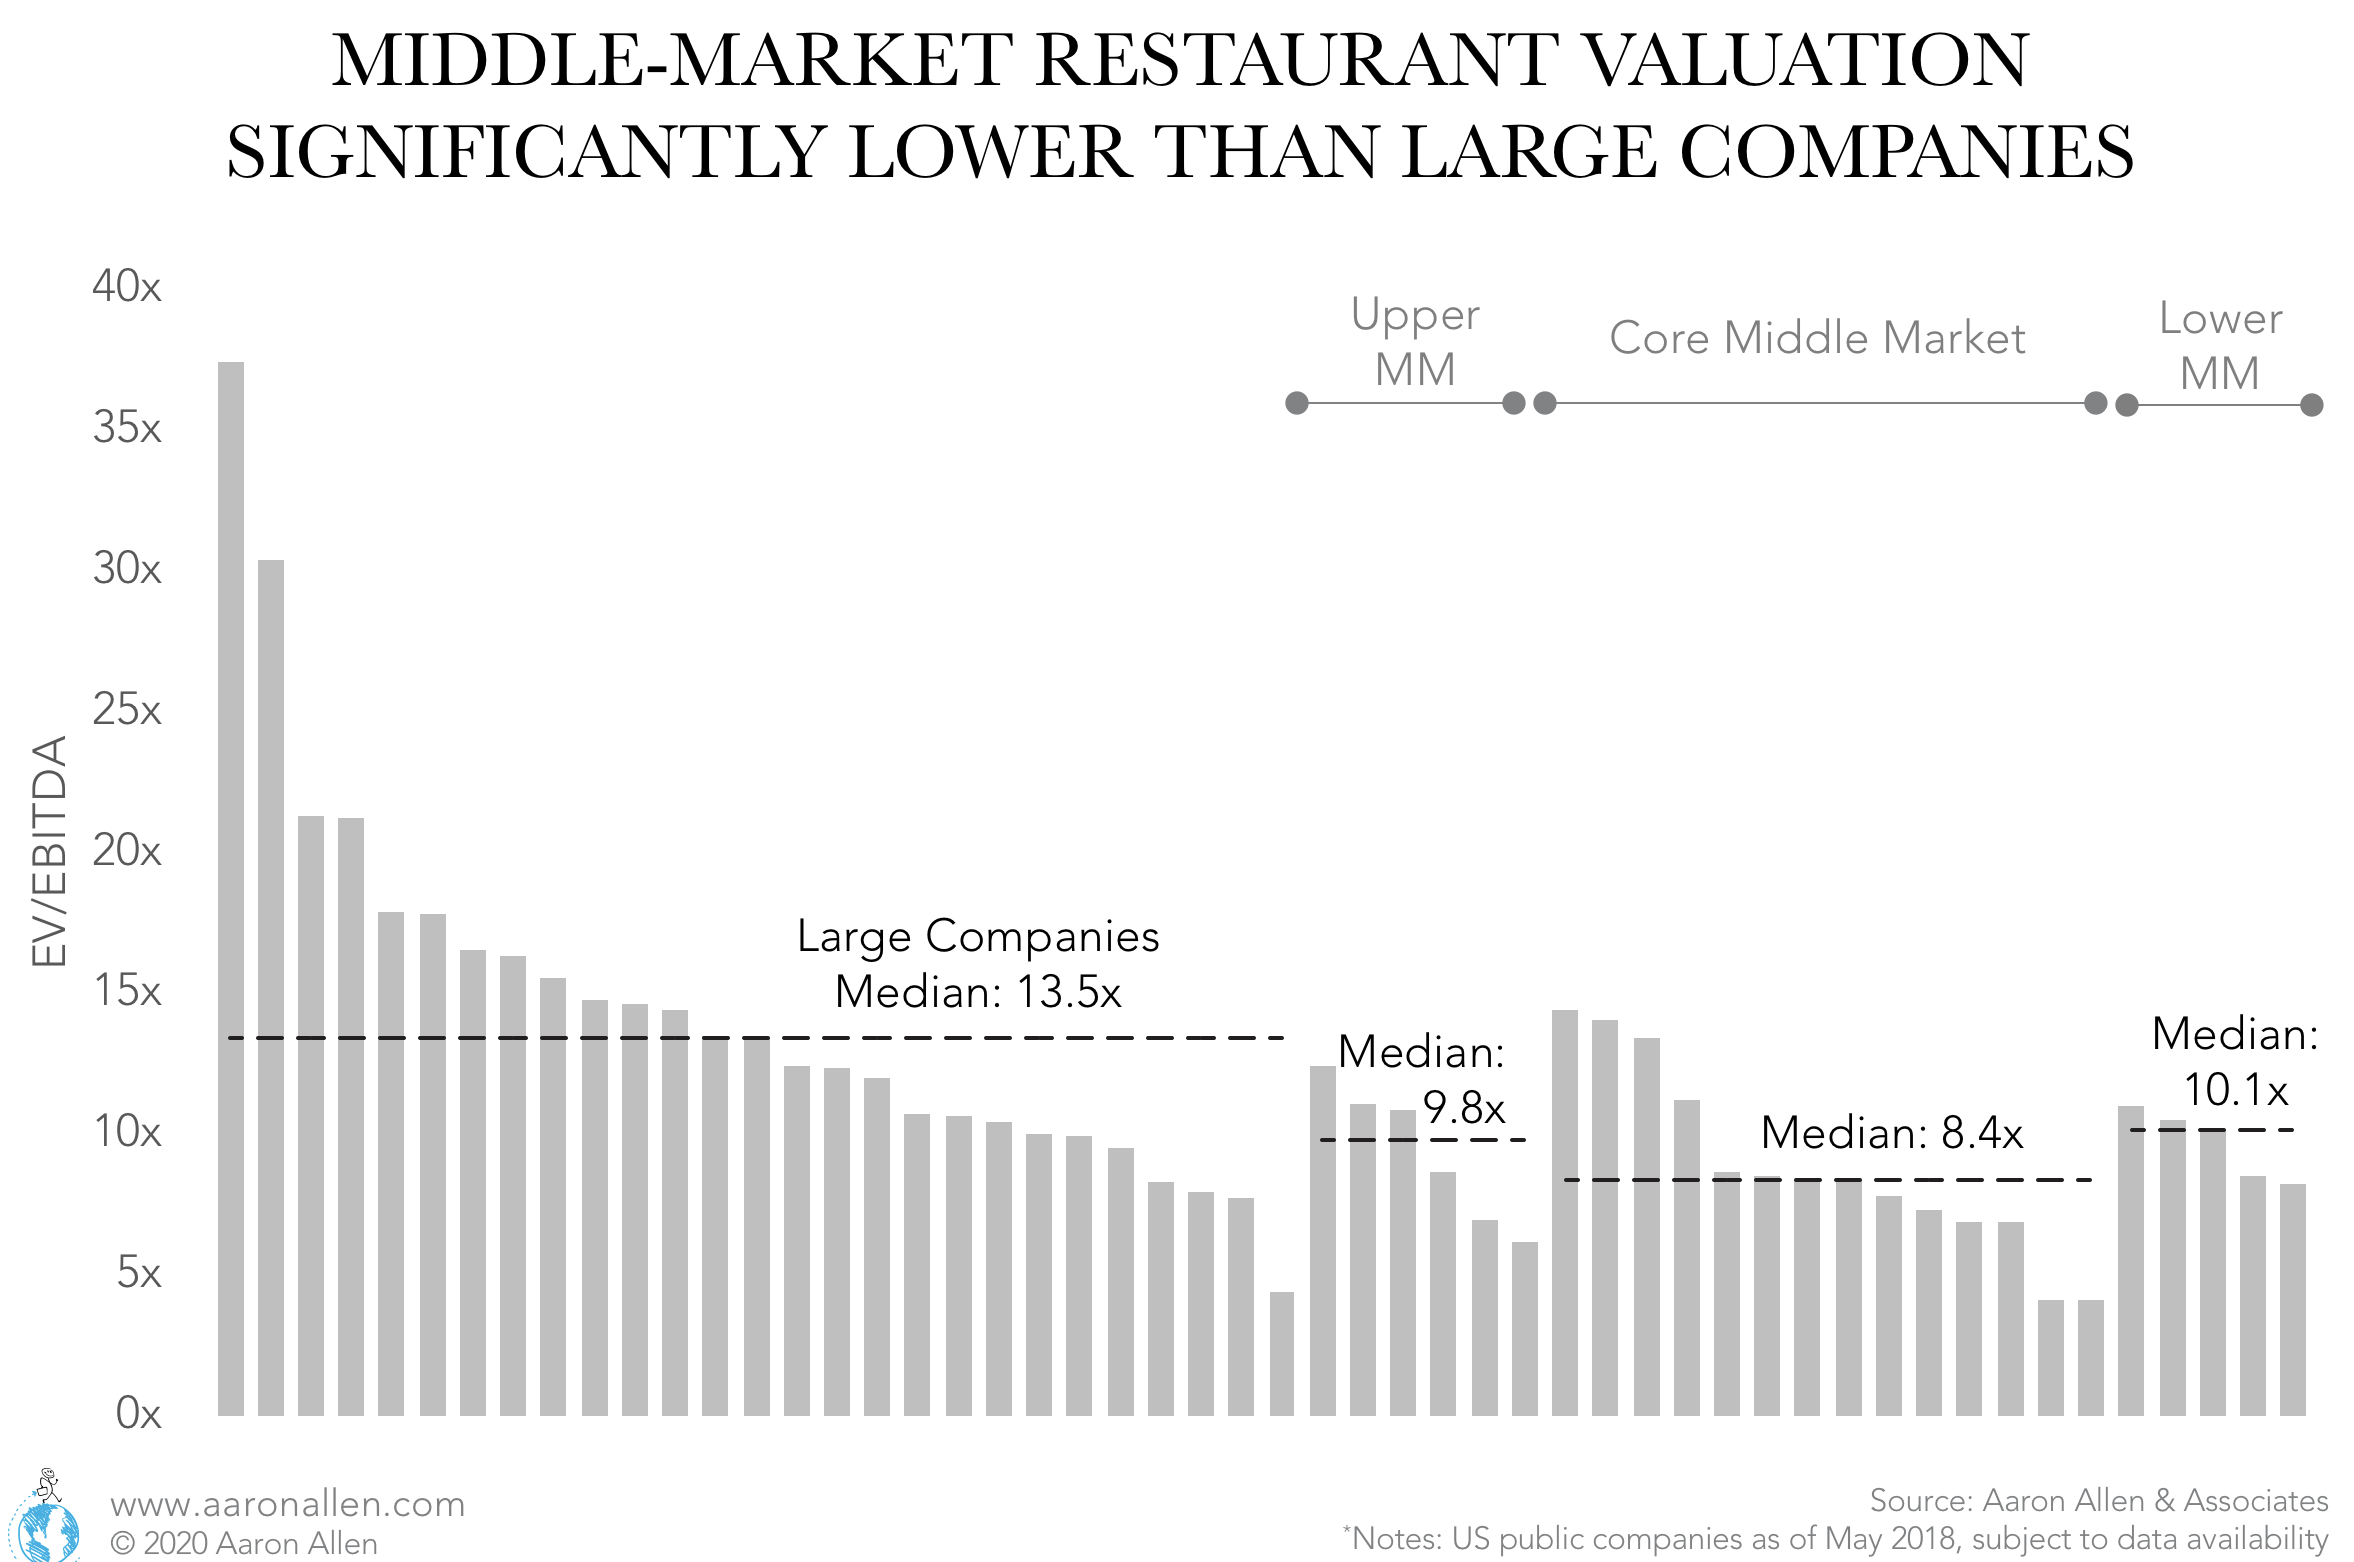 Large Restaurant Chains Reach Higher Multiples